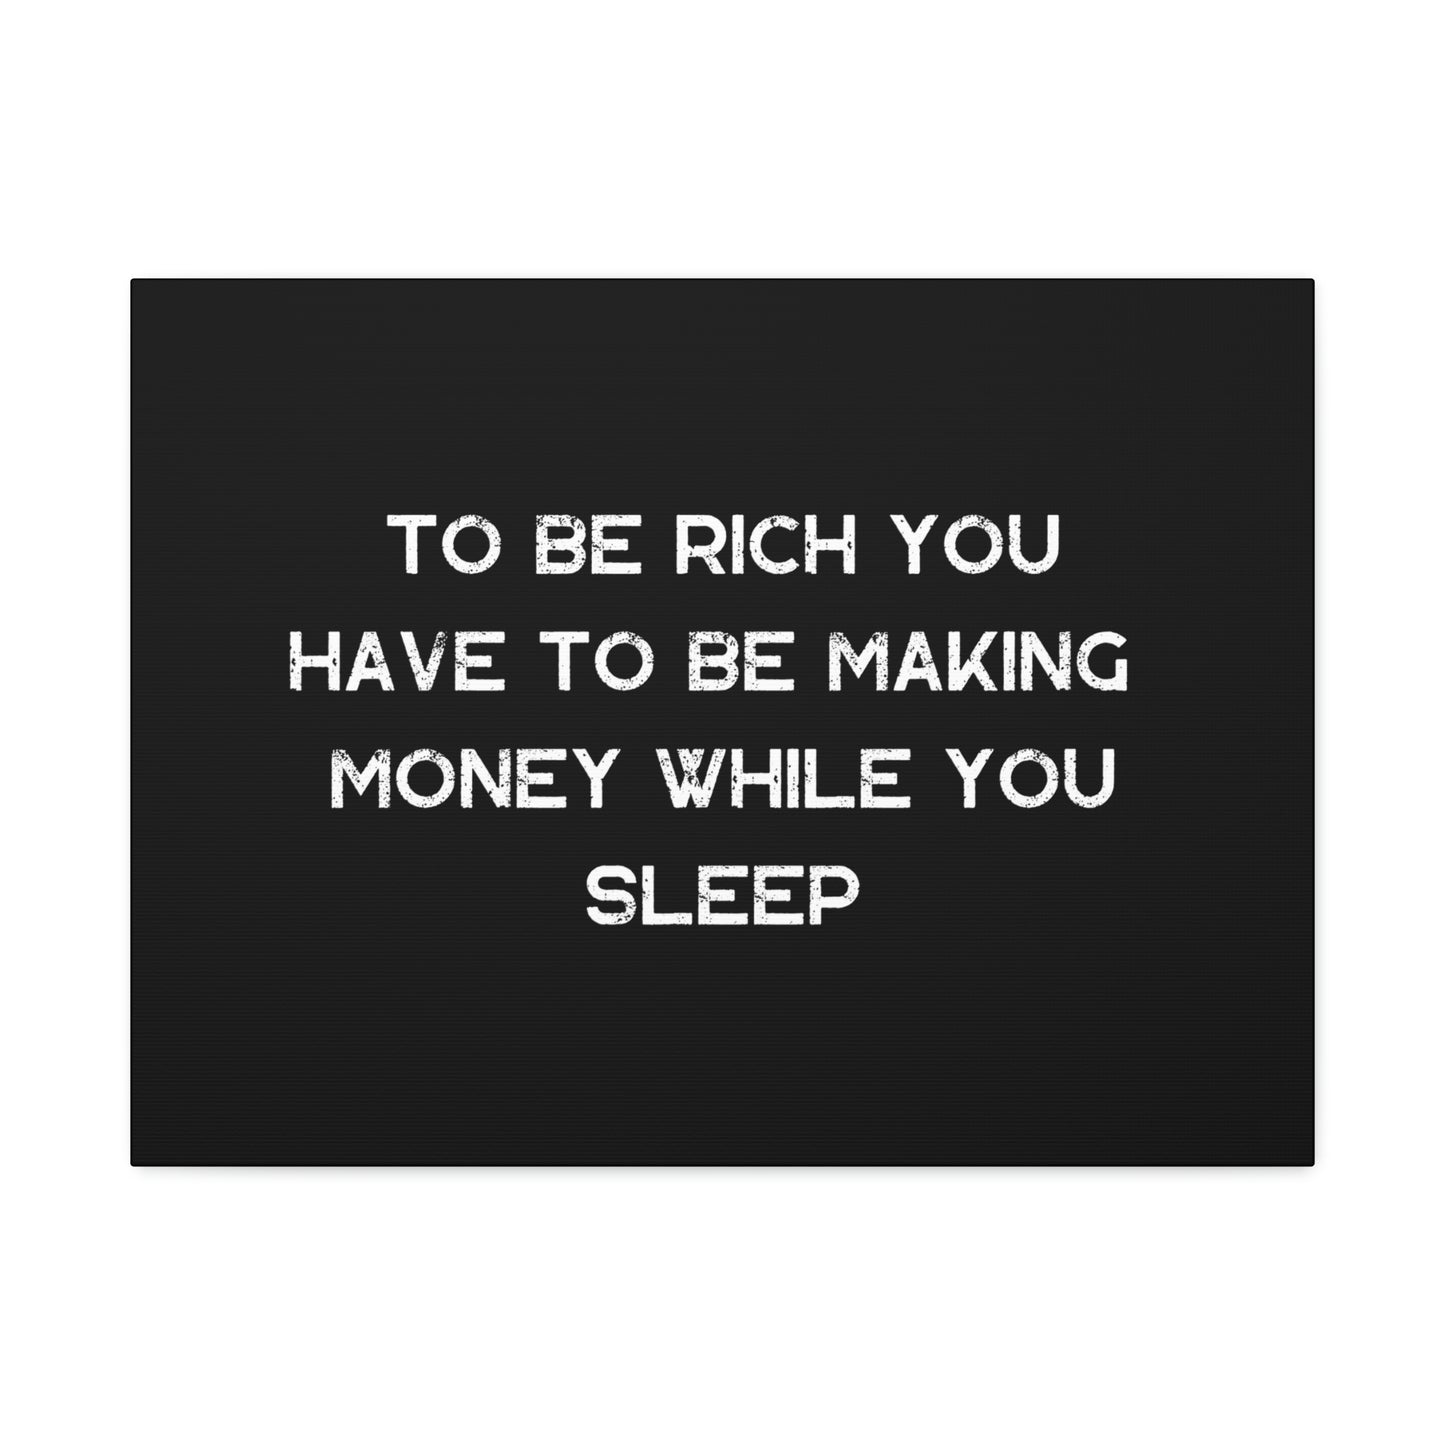 To Be Rich - By SwimOrDrownUK - Satin Canvas - Stretched